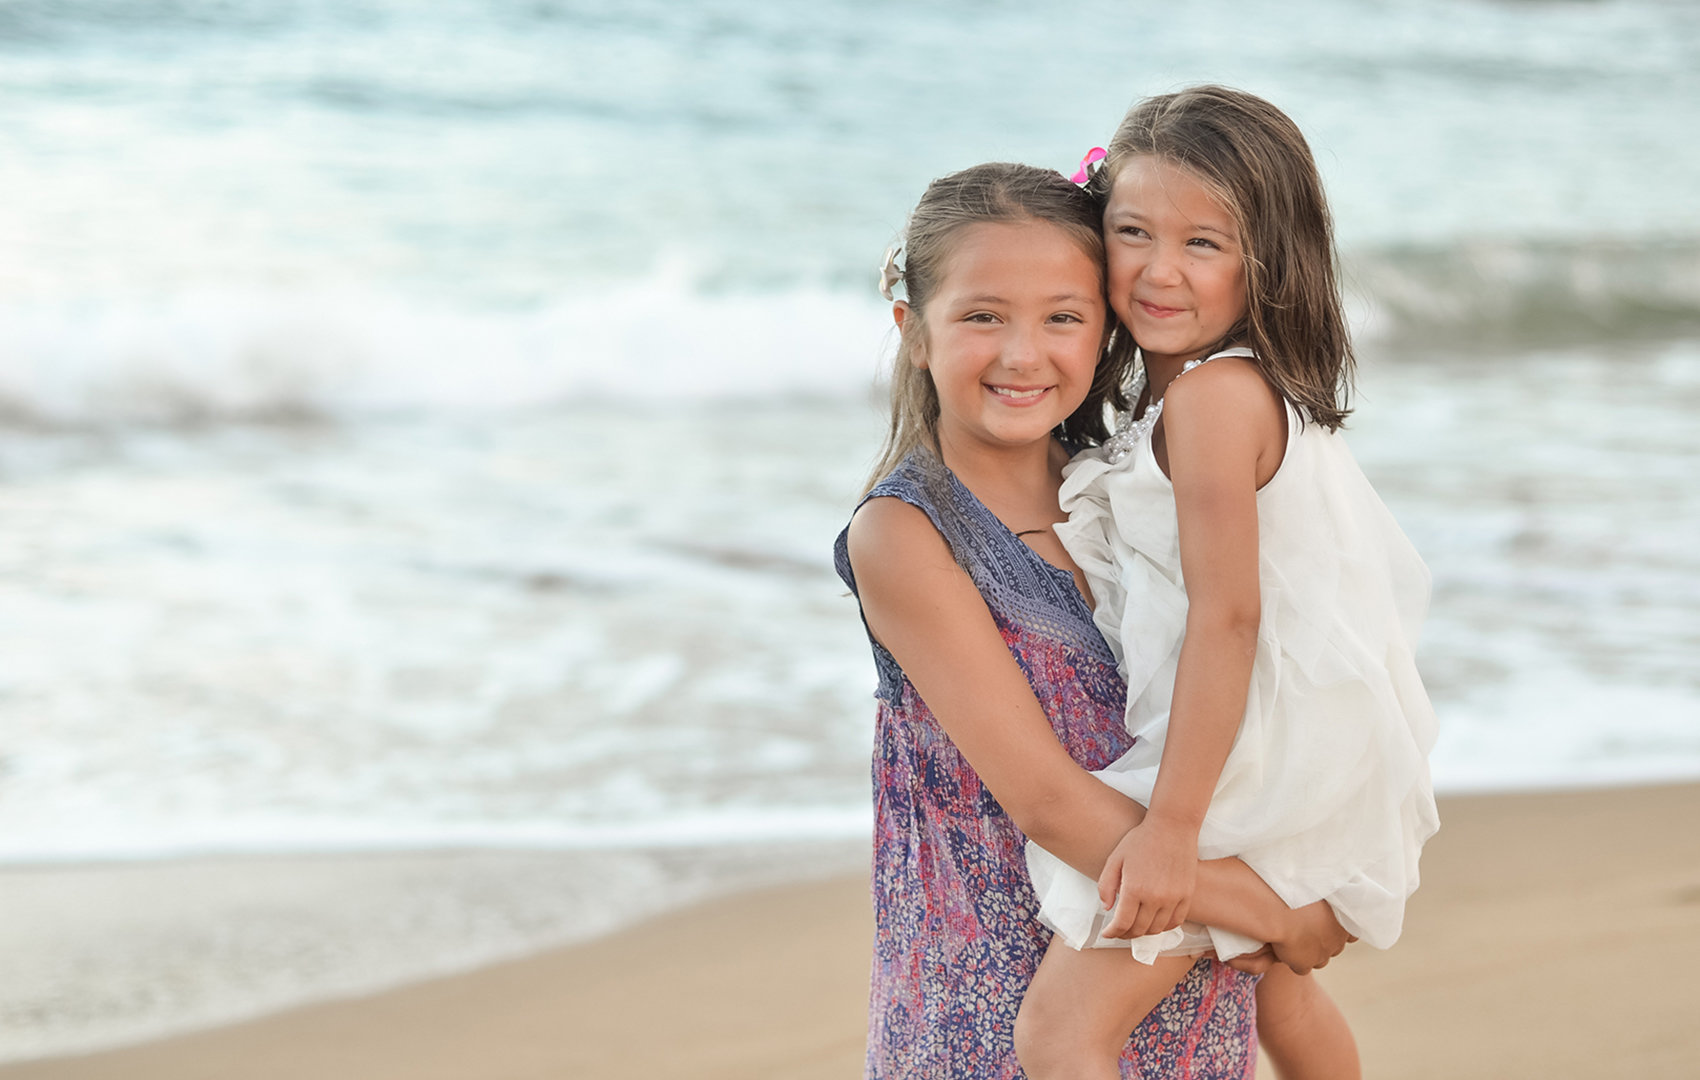 Big sister hold little sister on the beach in Kauai for their family portrait session.